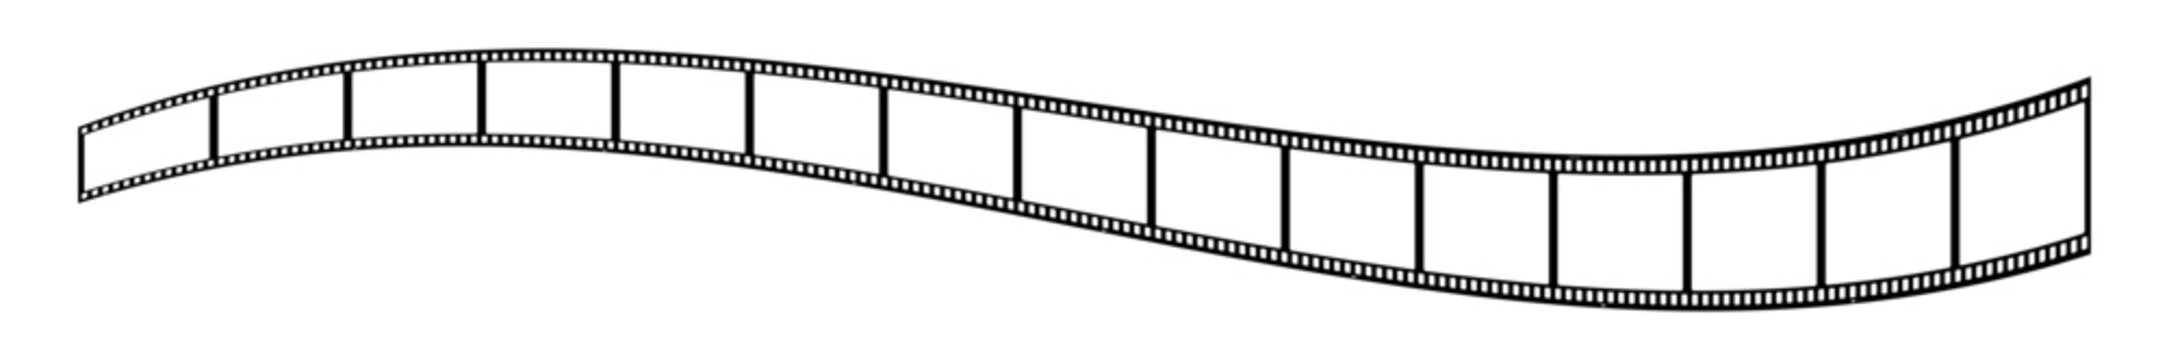 35mm film strip in 3d vector design with 15 frames on white background. Black film reel symbol illustration to use in photography, television, cinema, travel, photo frame.
